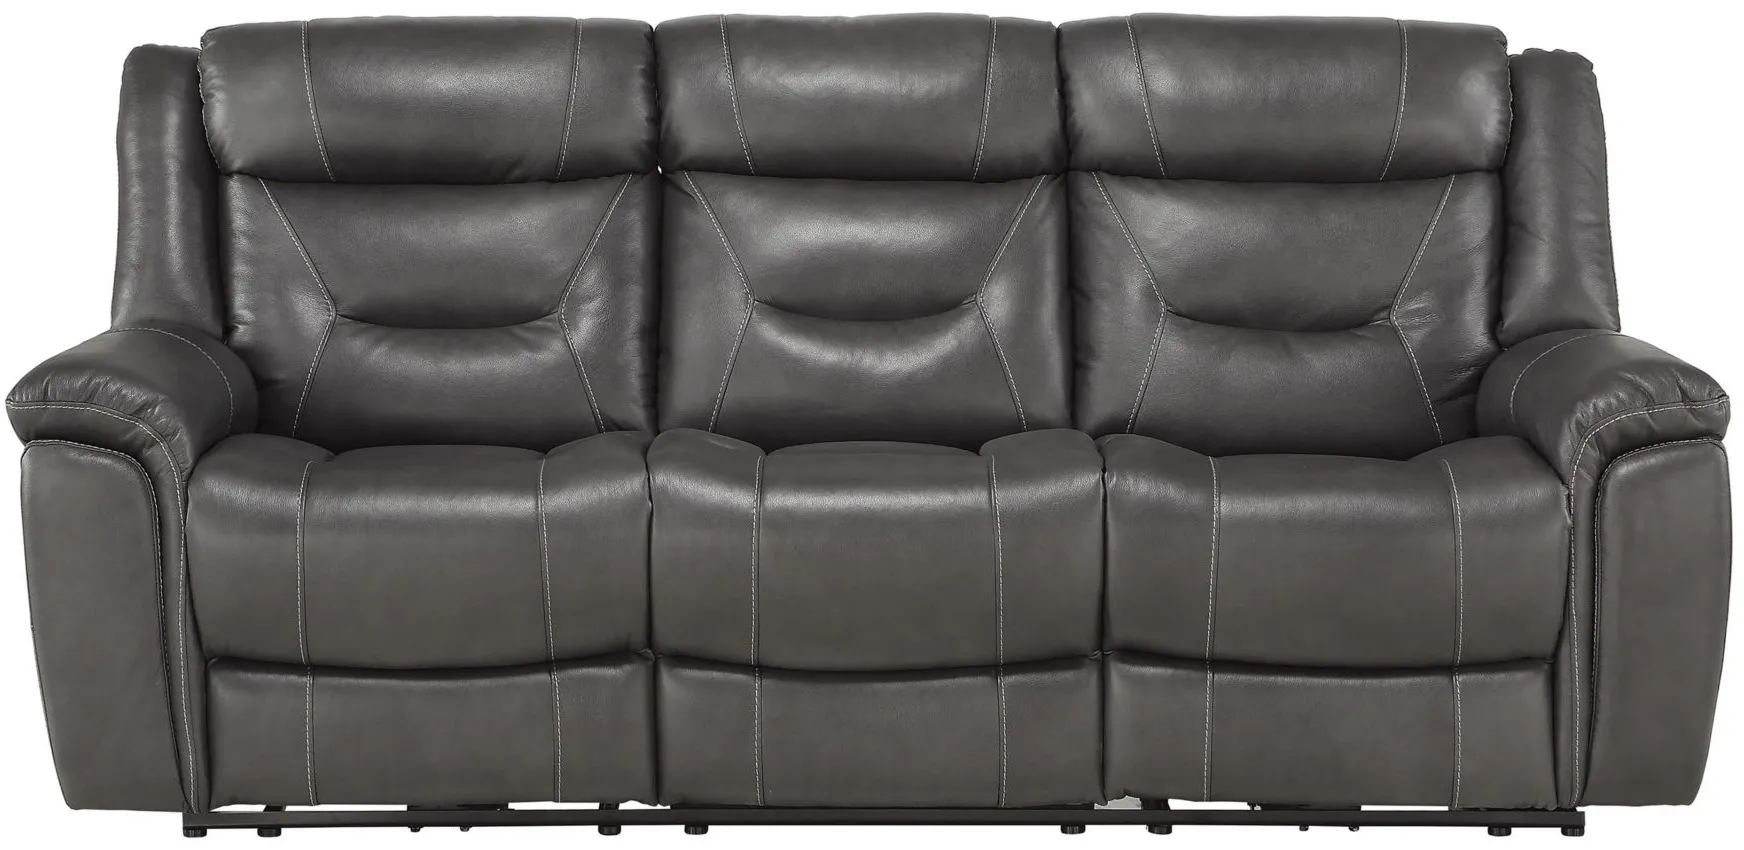 Northside Leather Power Reclining Sofa in Dark Gray by Homelegance